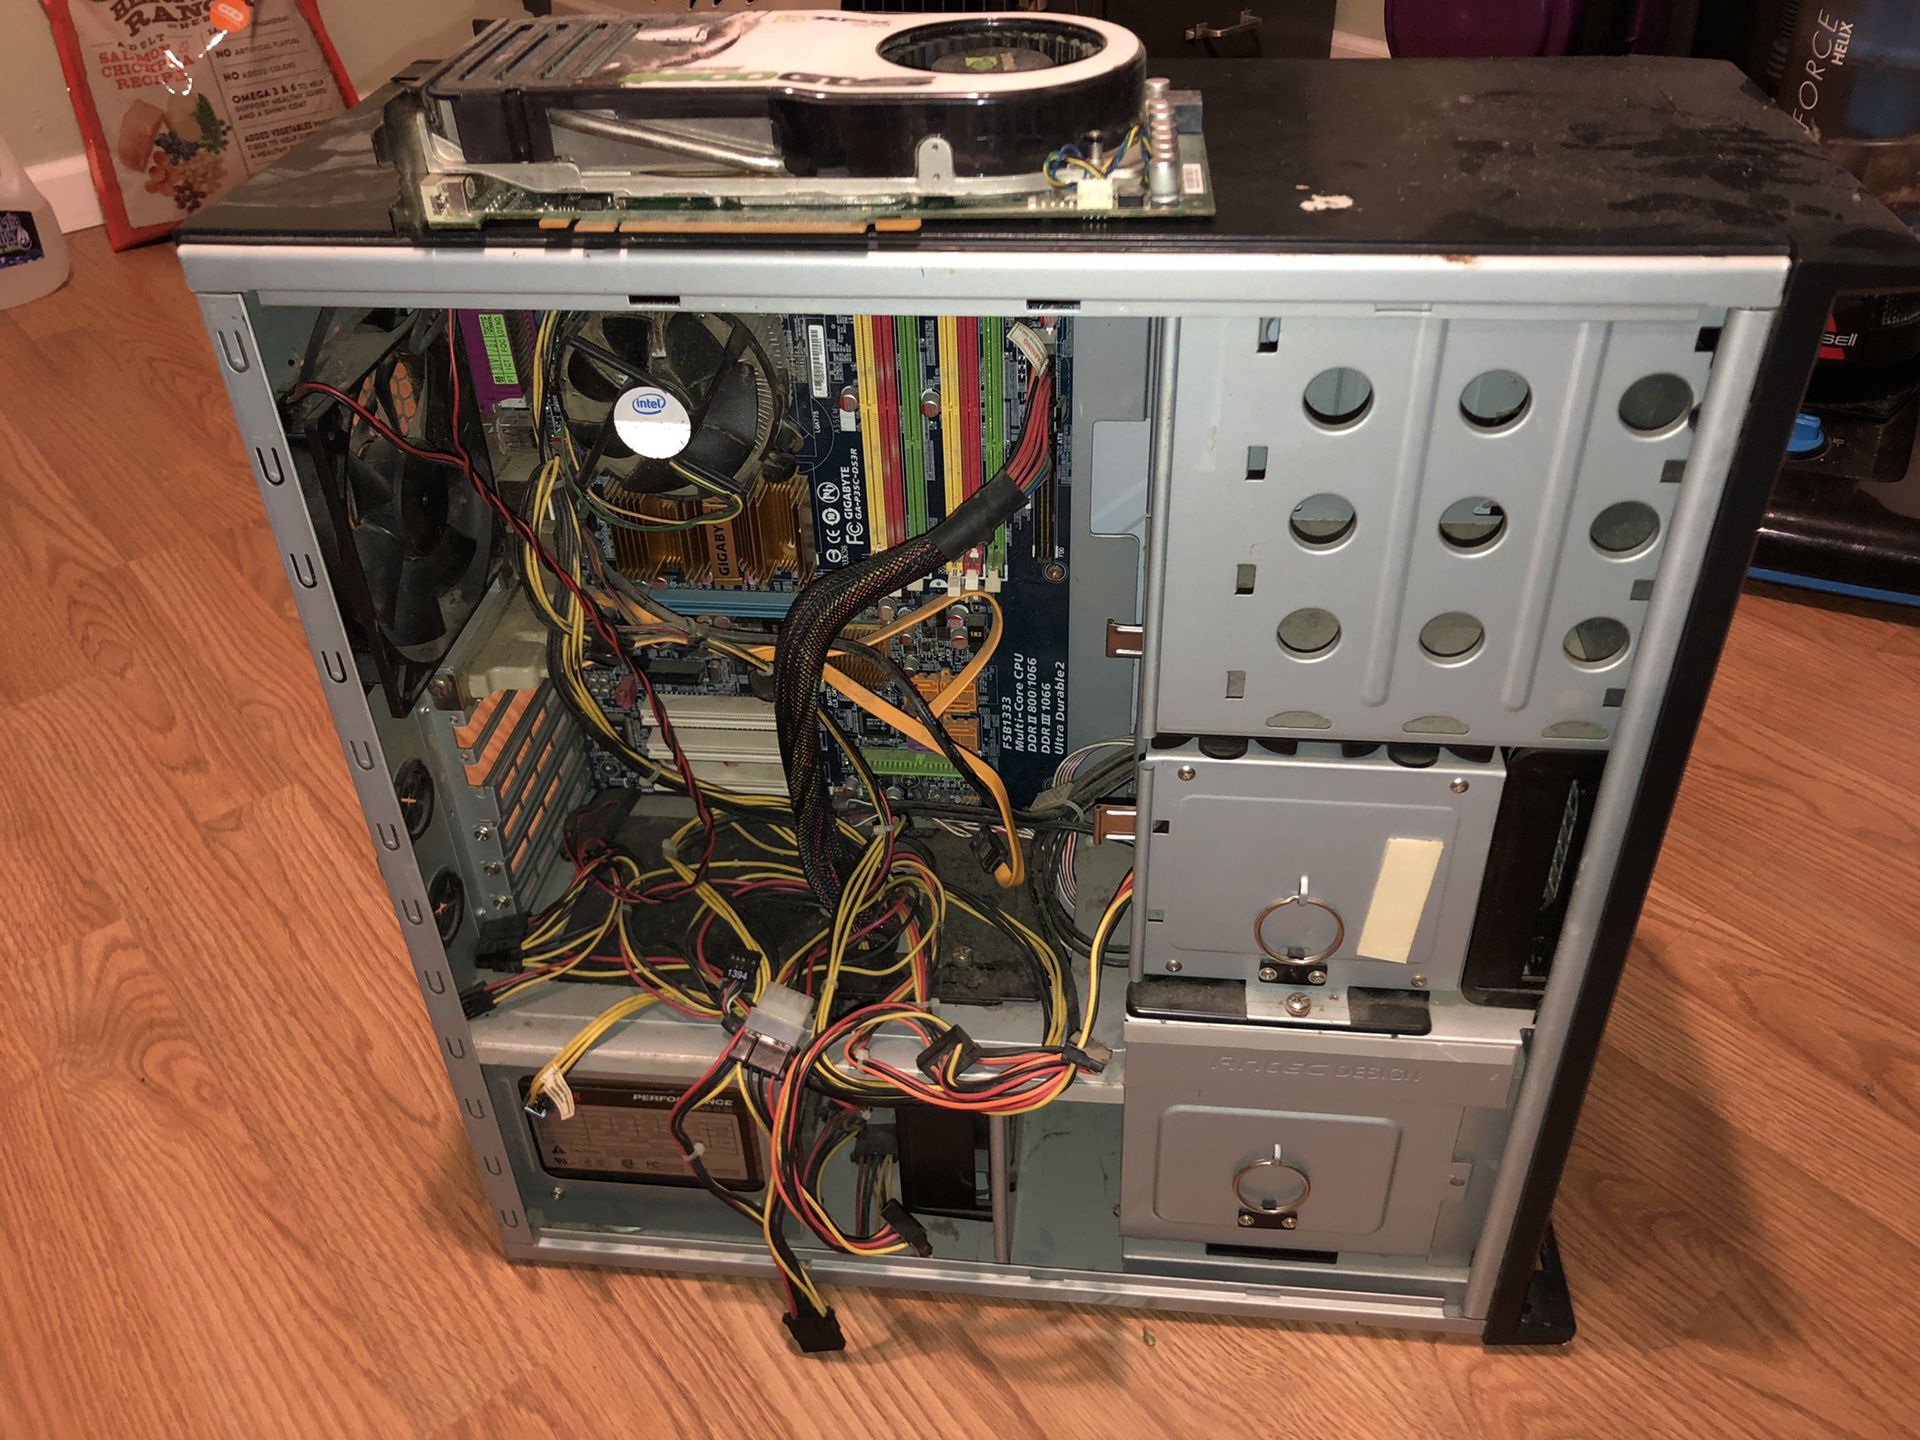 Computer case with motherboard, graphics card and power supply.